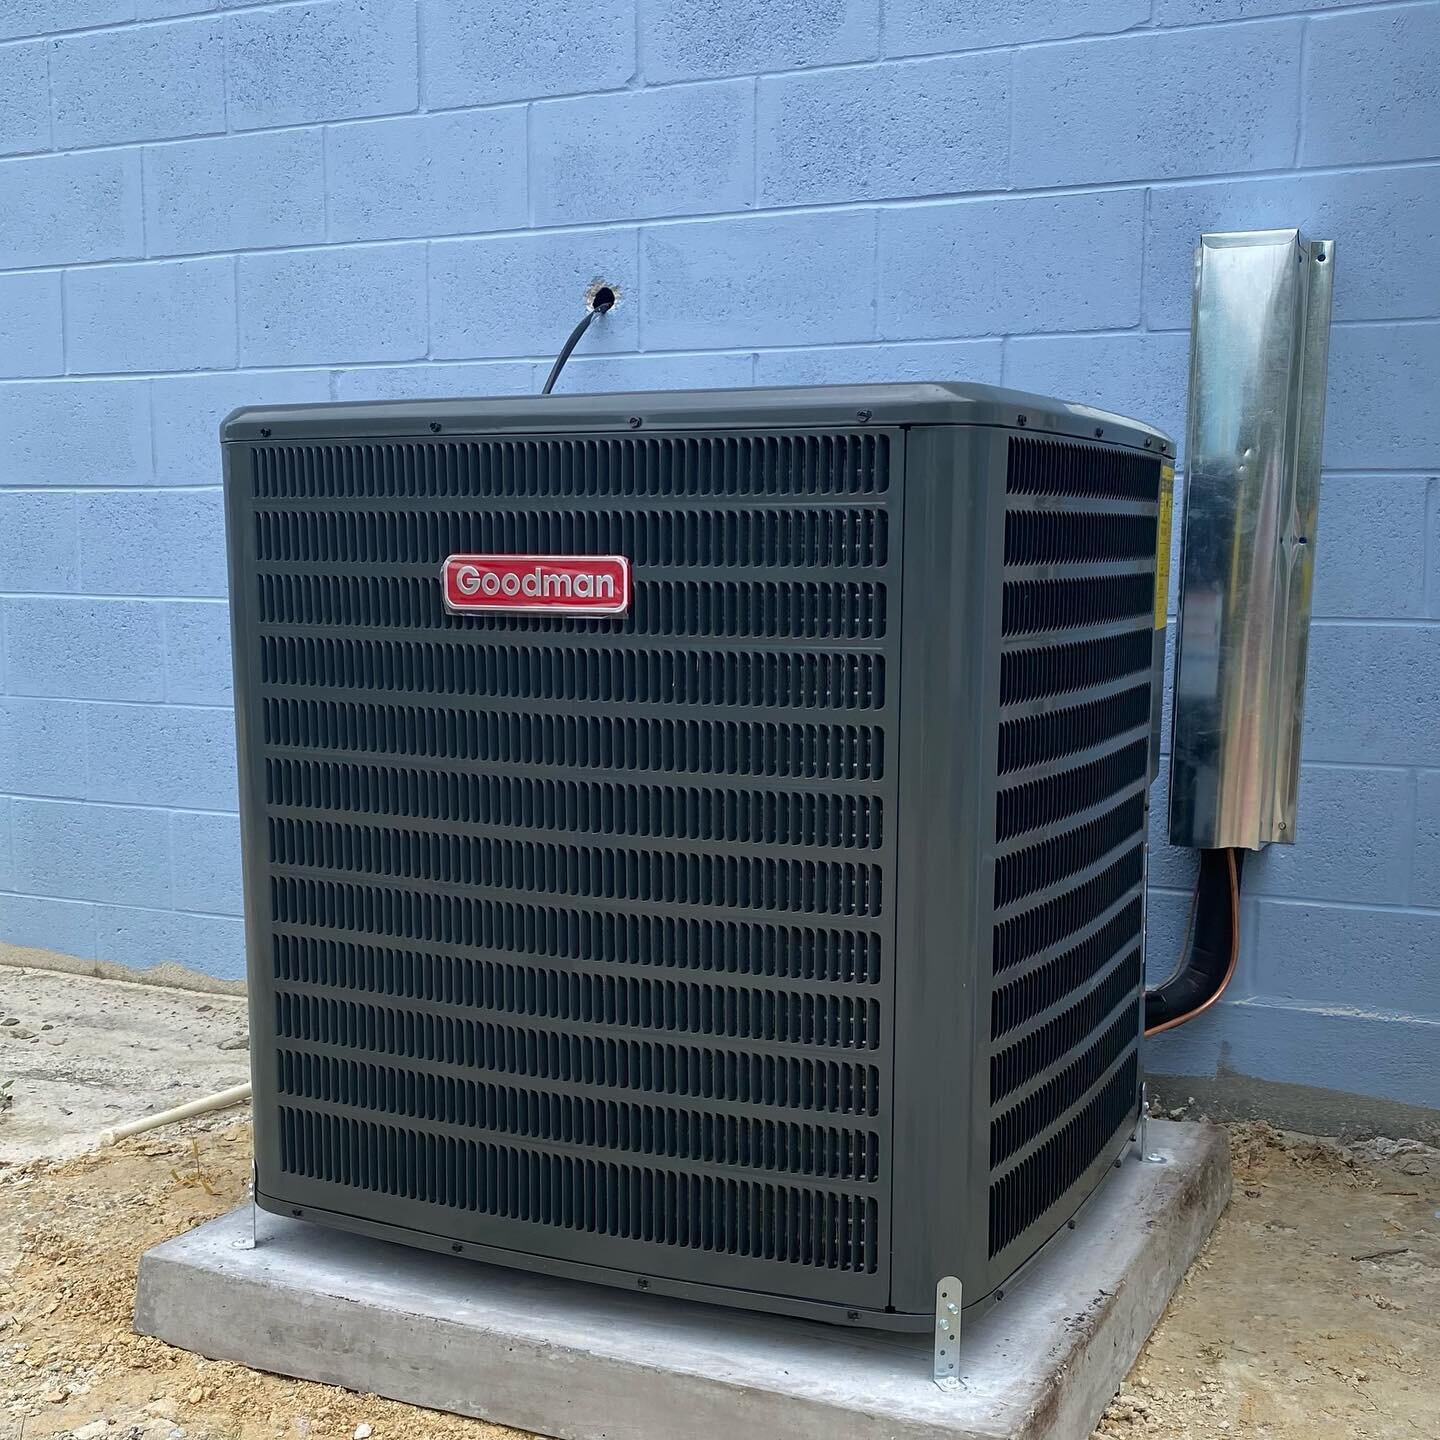 Goodman A/C unit install. On this install the customer wanted the inside unit suspended from the garage ceiling, to save floor space. 
#goodman #airconditioning #install #newconstruction #remodel #currentsituation #energysolutions